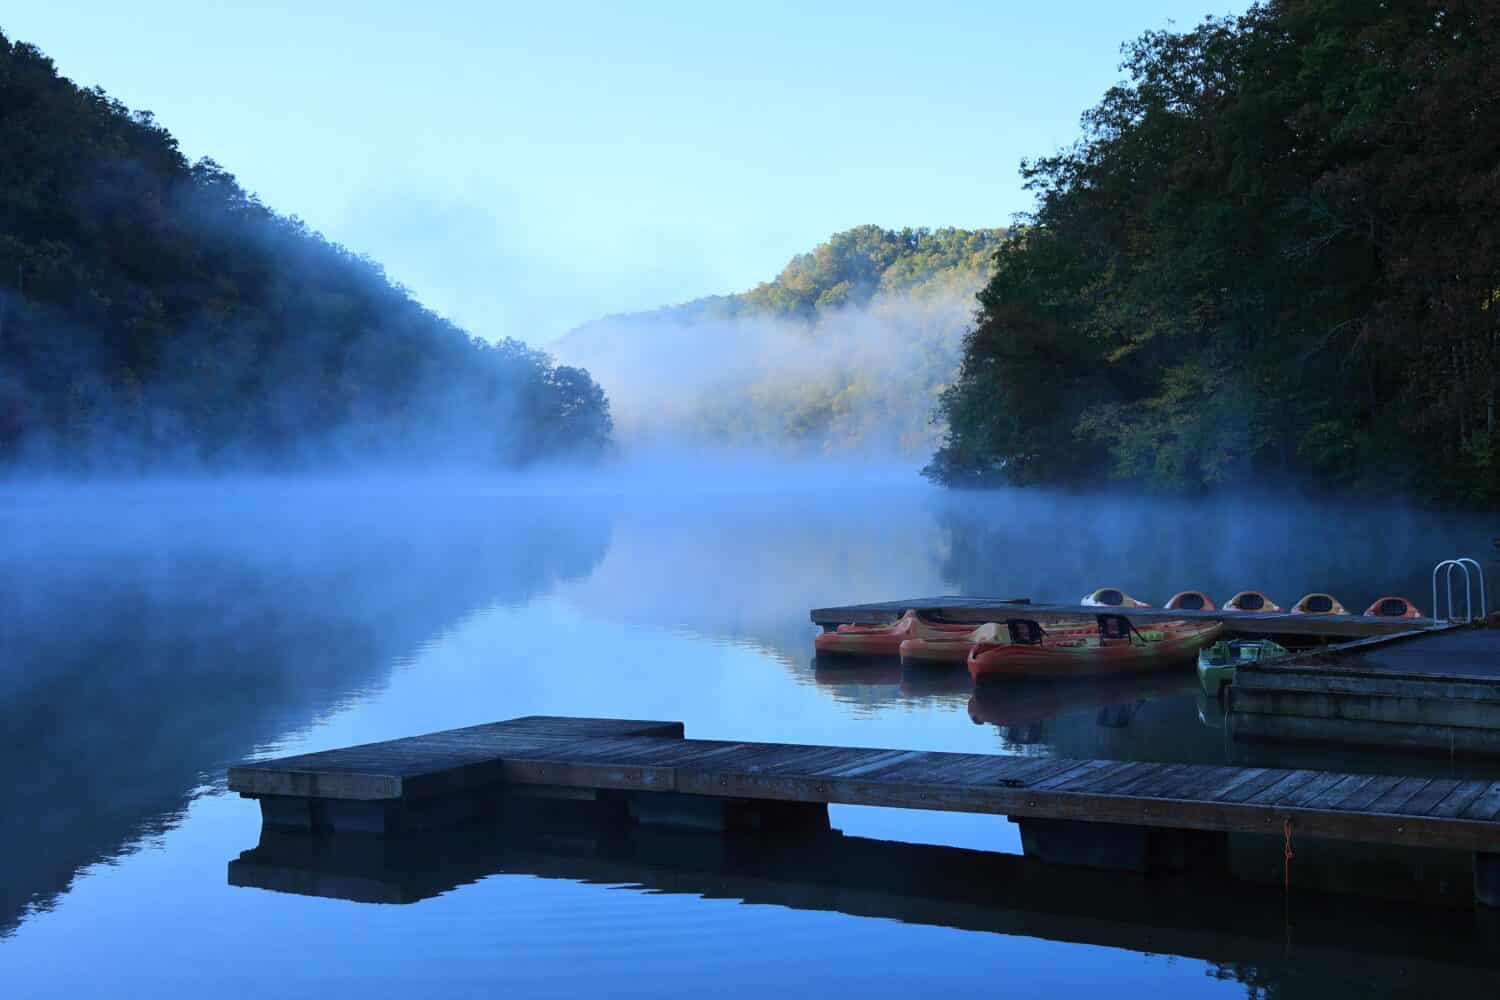 Dawn breaks on a cold and misty autumn morning at Hungry Mother State Park in Marion, Virginia.